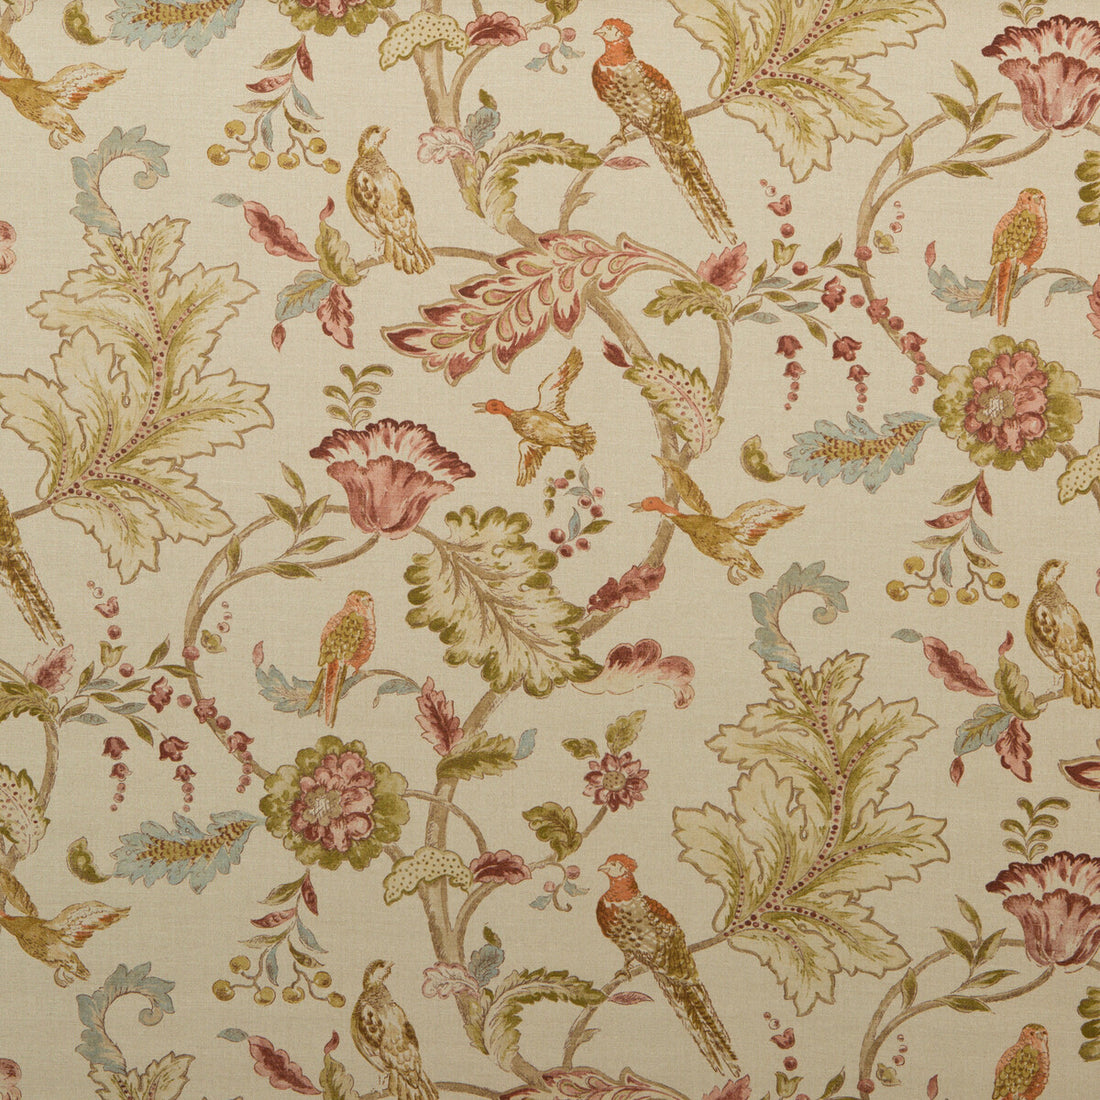 Early Birds fabric in natural color - pattern FD241.K101.0 - by Mulberry in the Great Park collection